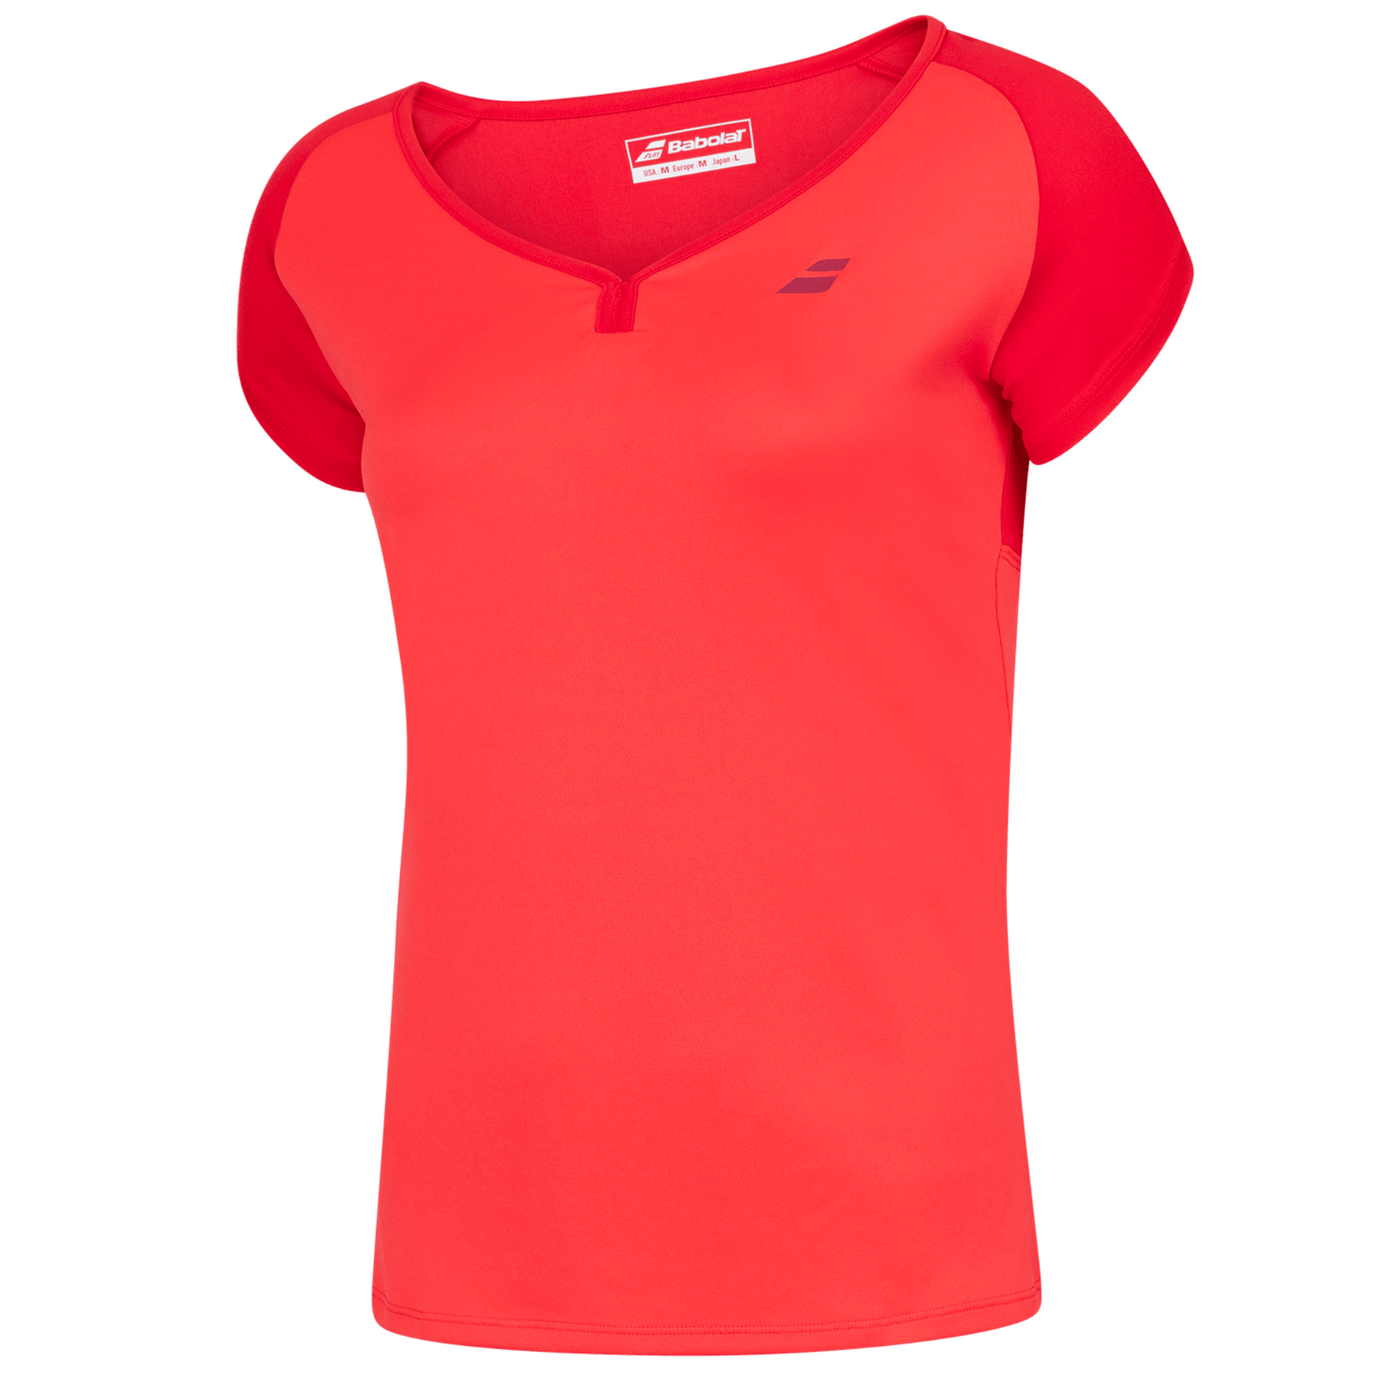 Babolat Play Cap Sleeve Girls Top 5027 - Tomato Red